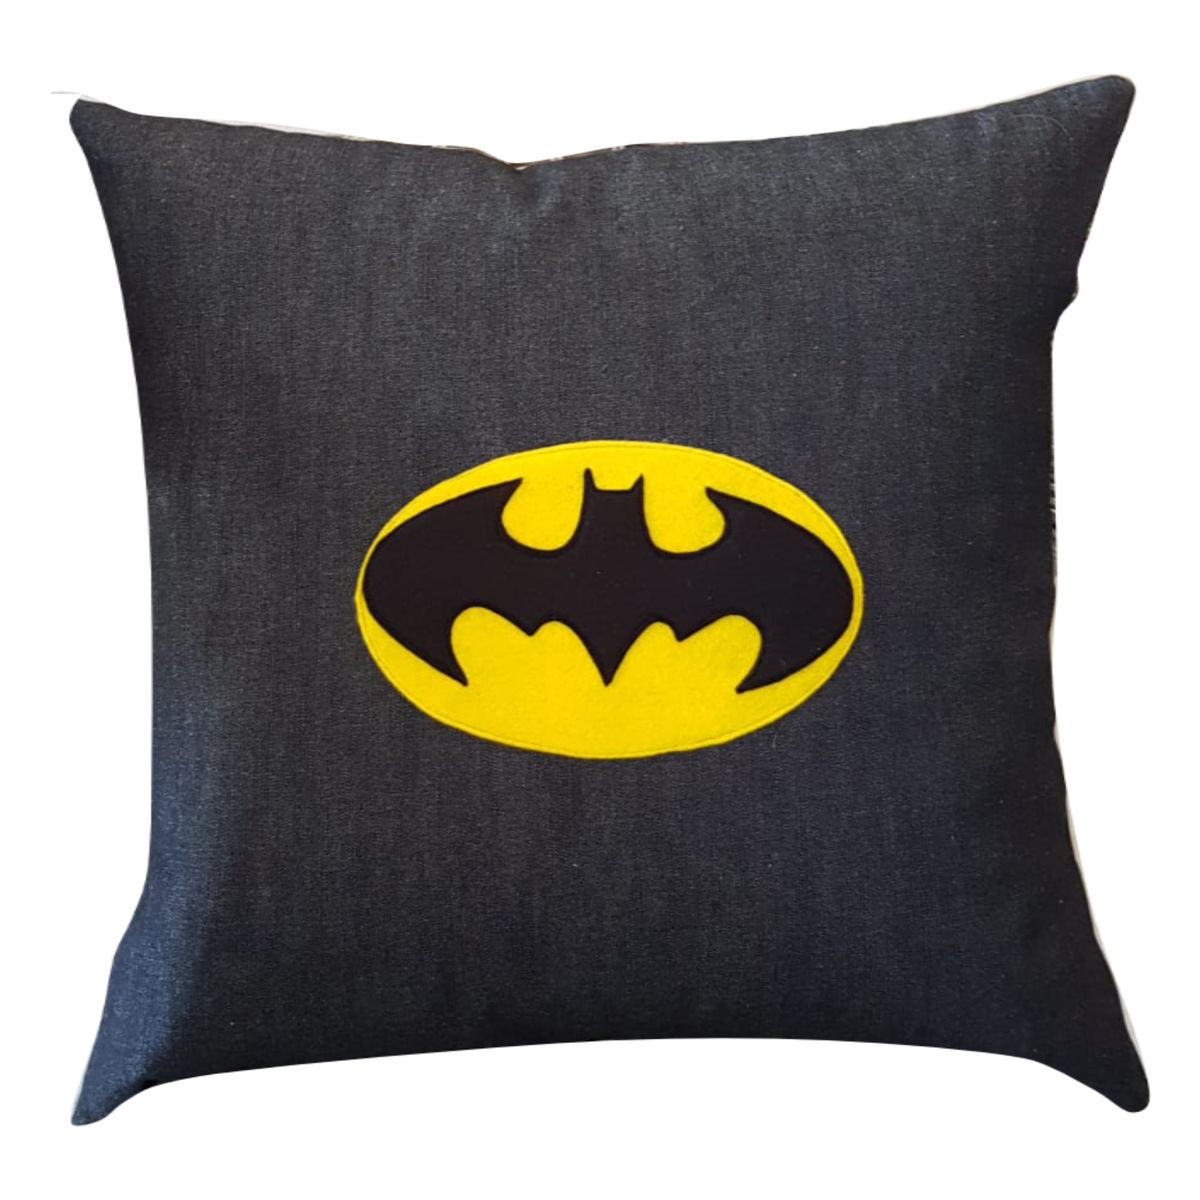 Batman Pillow Cover - Black/Yellow | Buy Online in South Africa |  